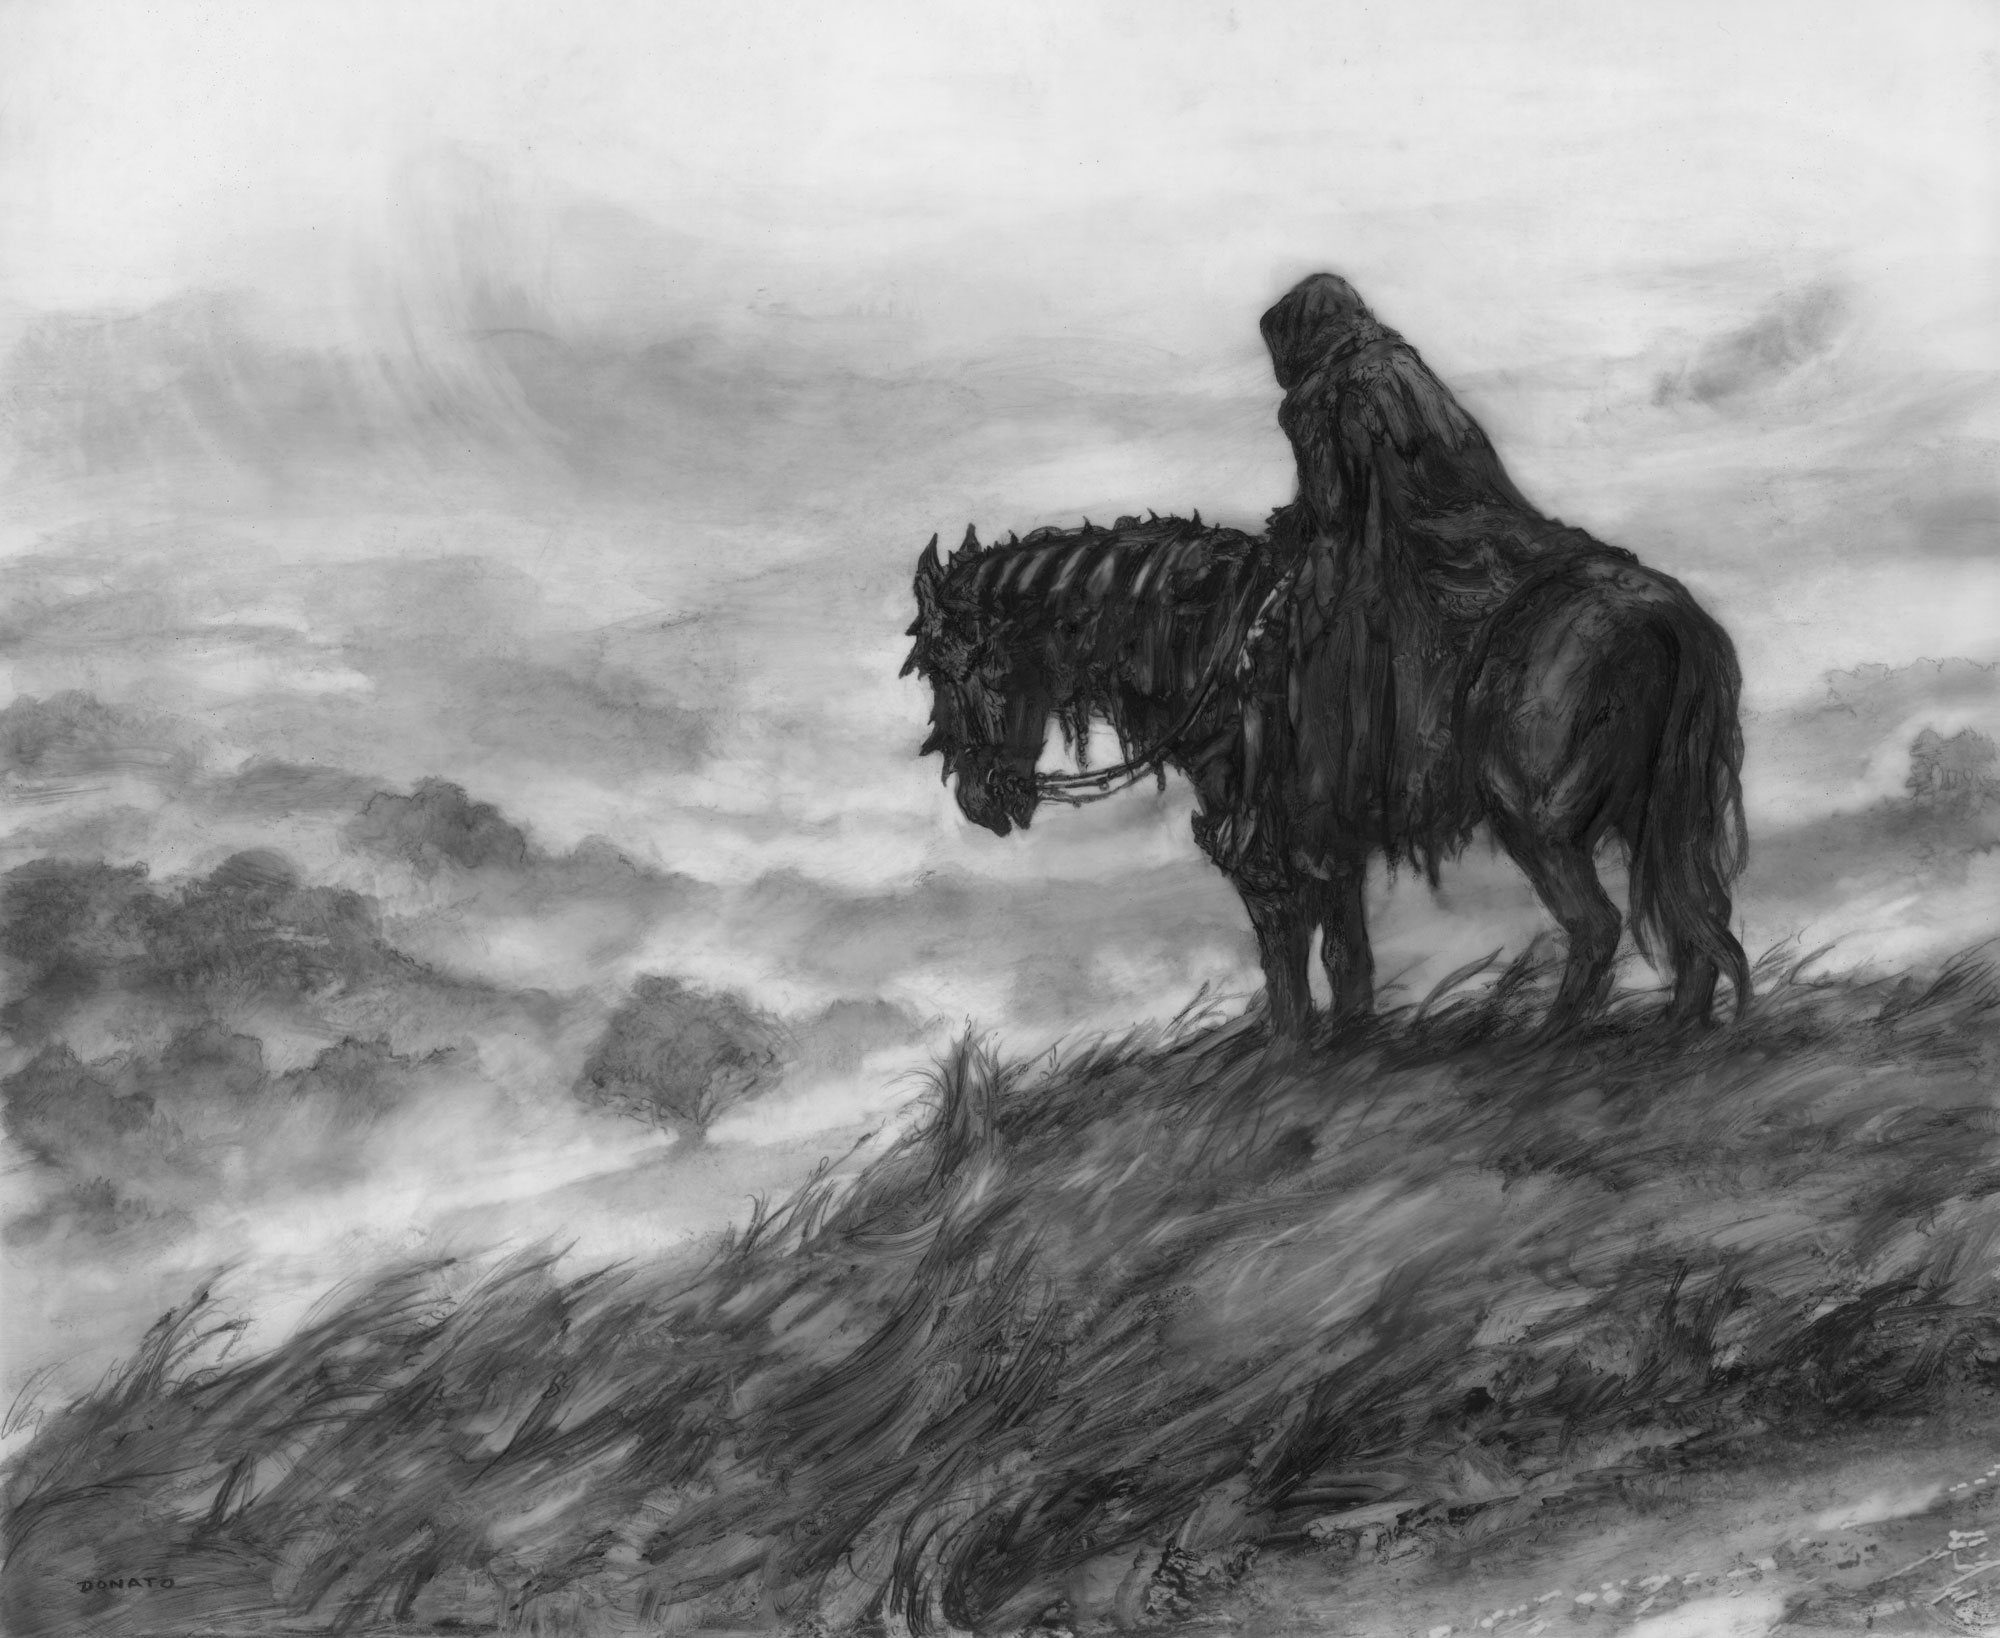 Black Rider - Searching for Baggins
17" x 14" graphite pencil and paint 2019
collection of Leo Gonzales